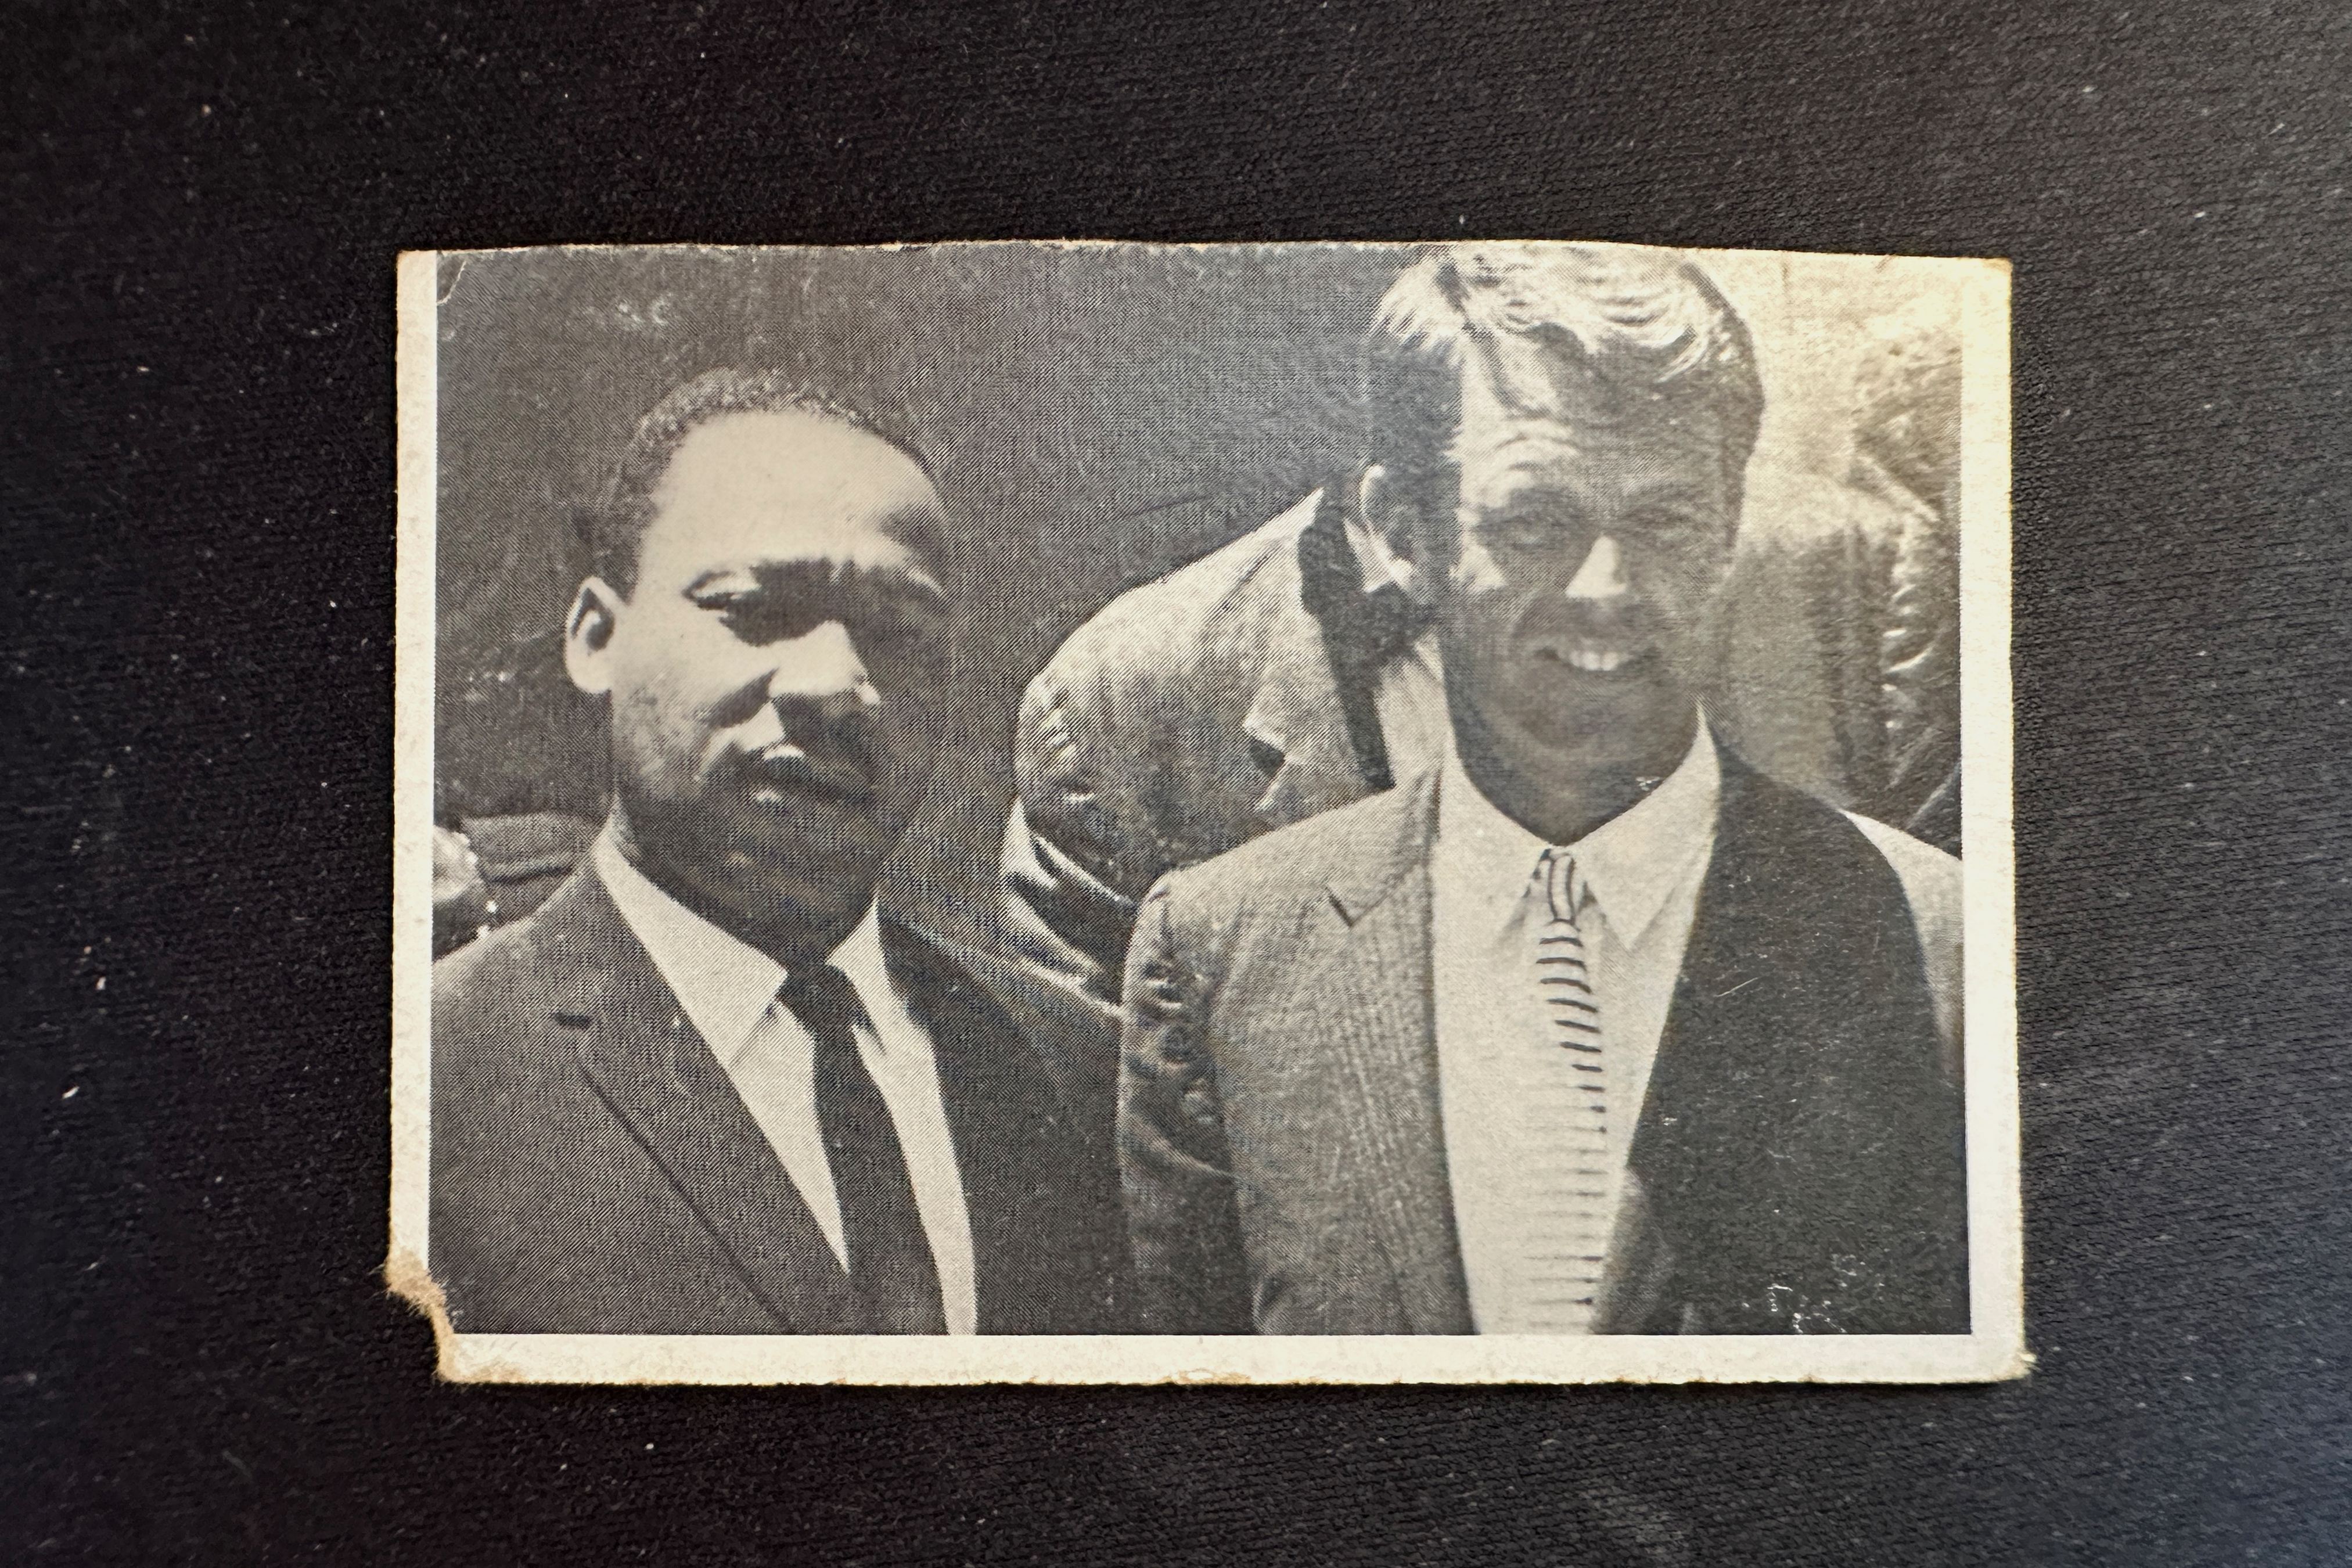 A black-and-white photo of Martin Luther King Jr. and Bobby Kennedy